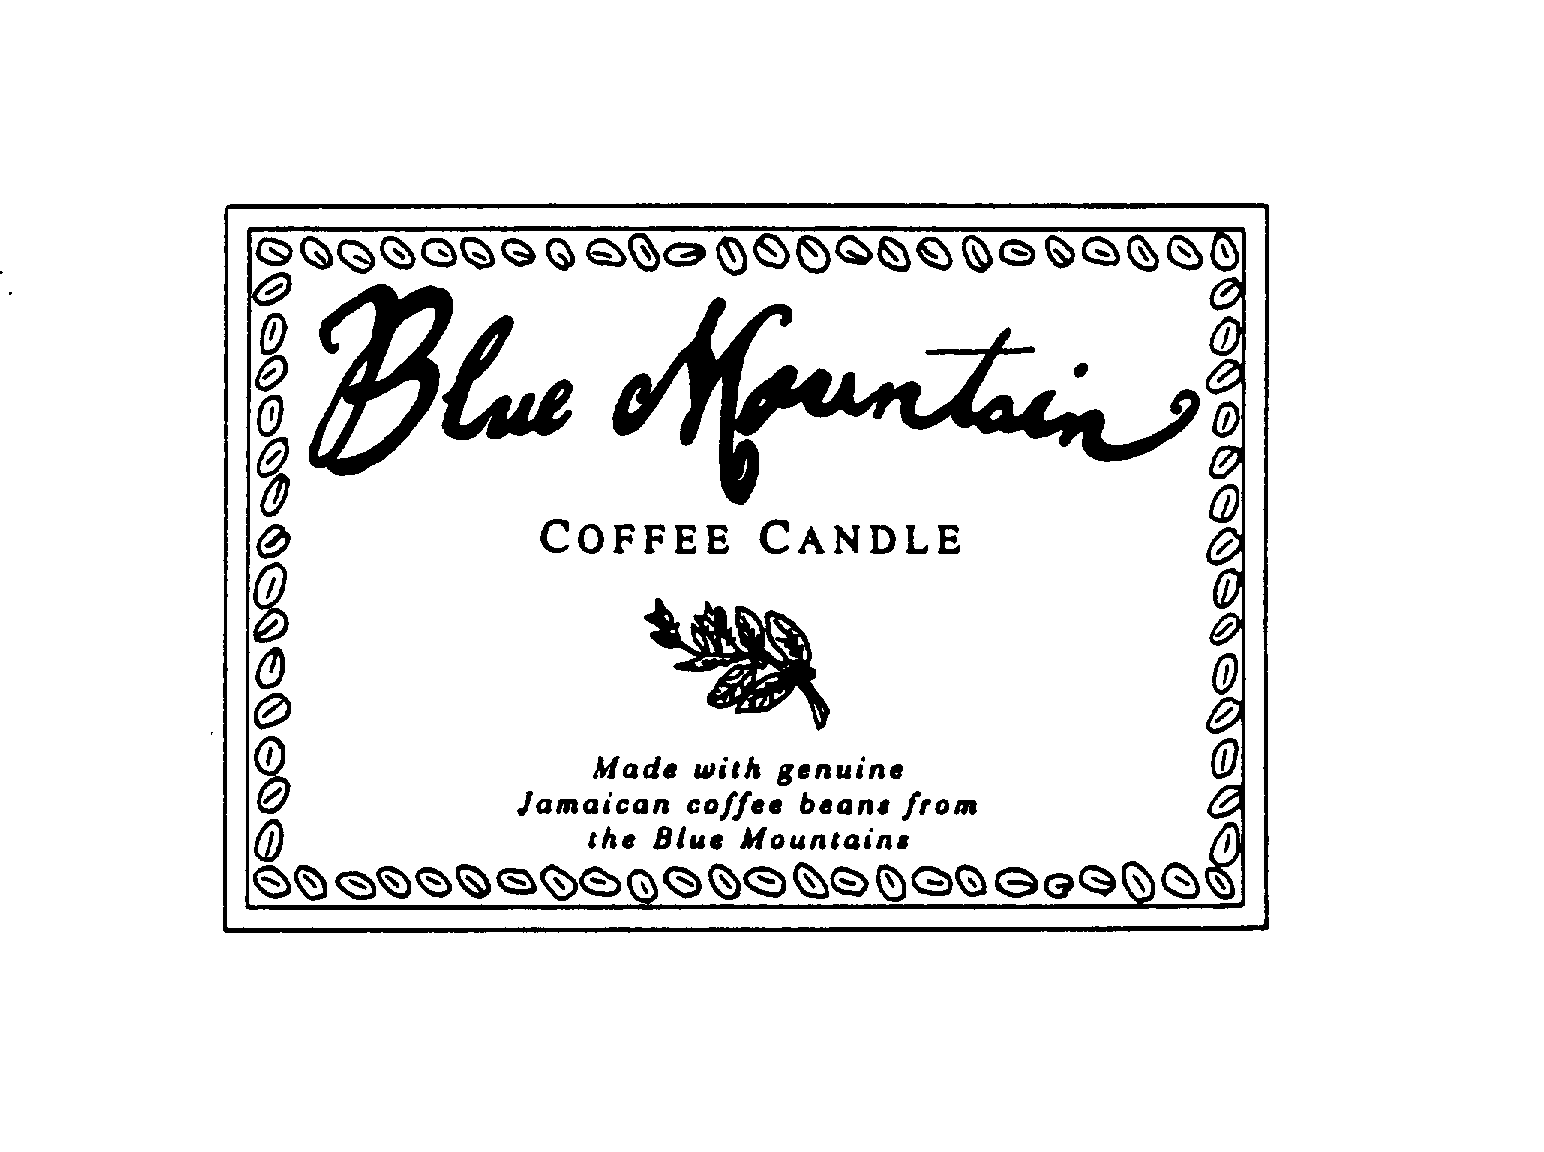  BLUE MOUNTAIN COFFEE CANDLE MADE WITH GENUINE JAMAICAN COFFEE BEANS FROM THE BLUE MOUNTAINS